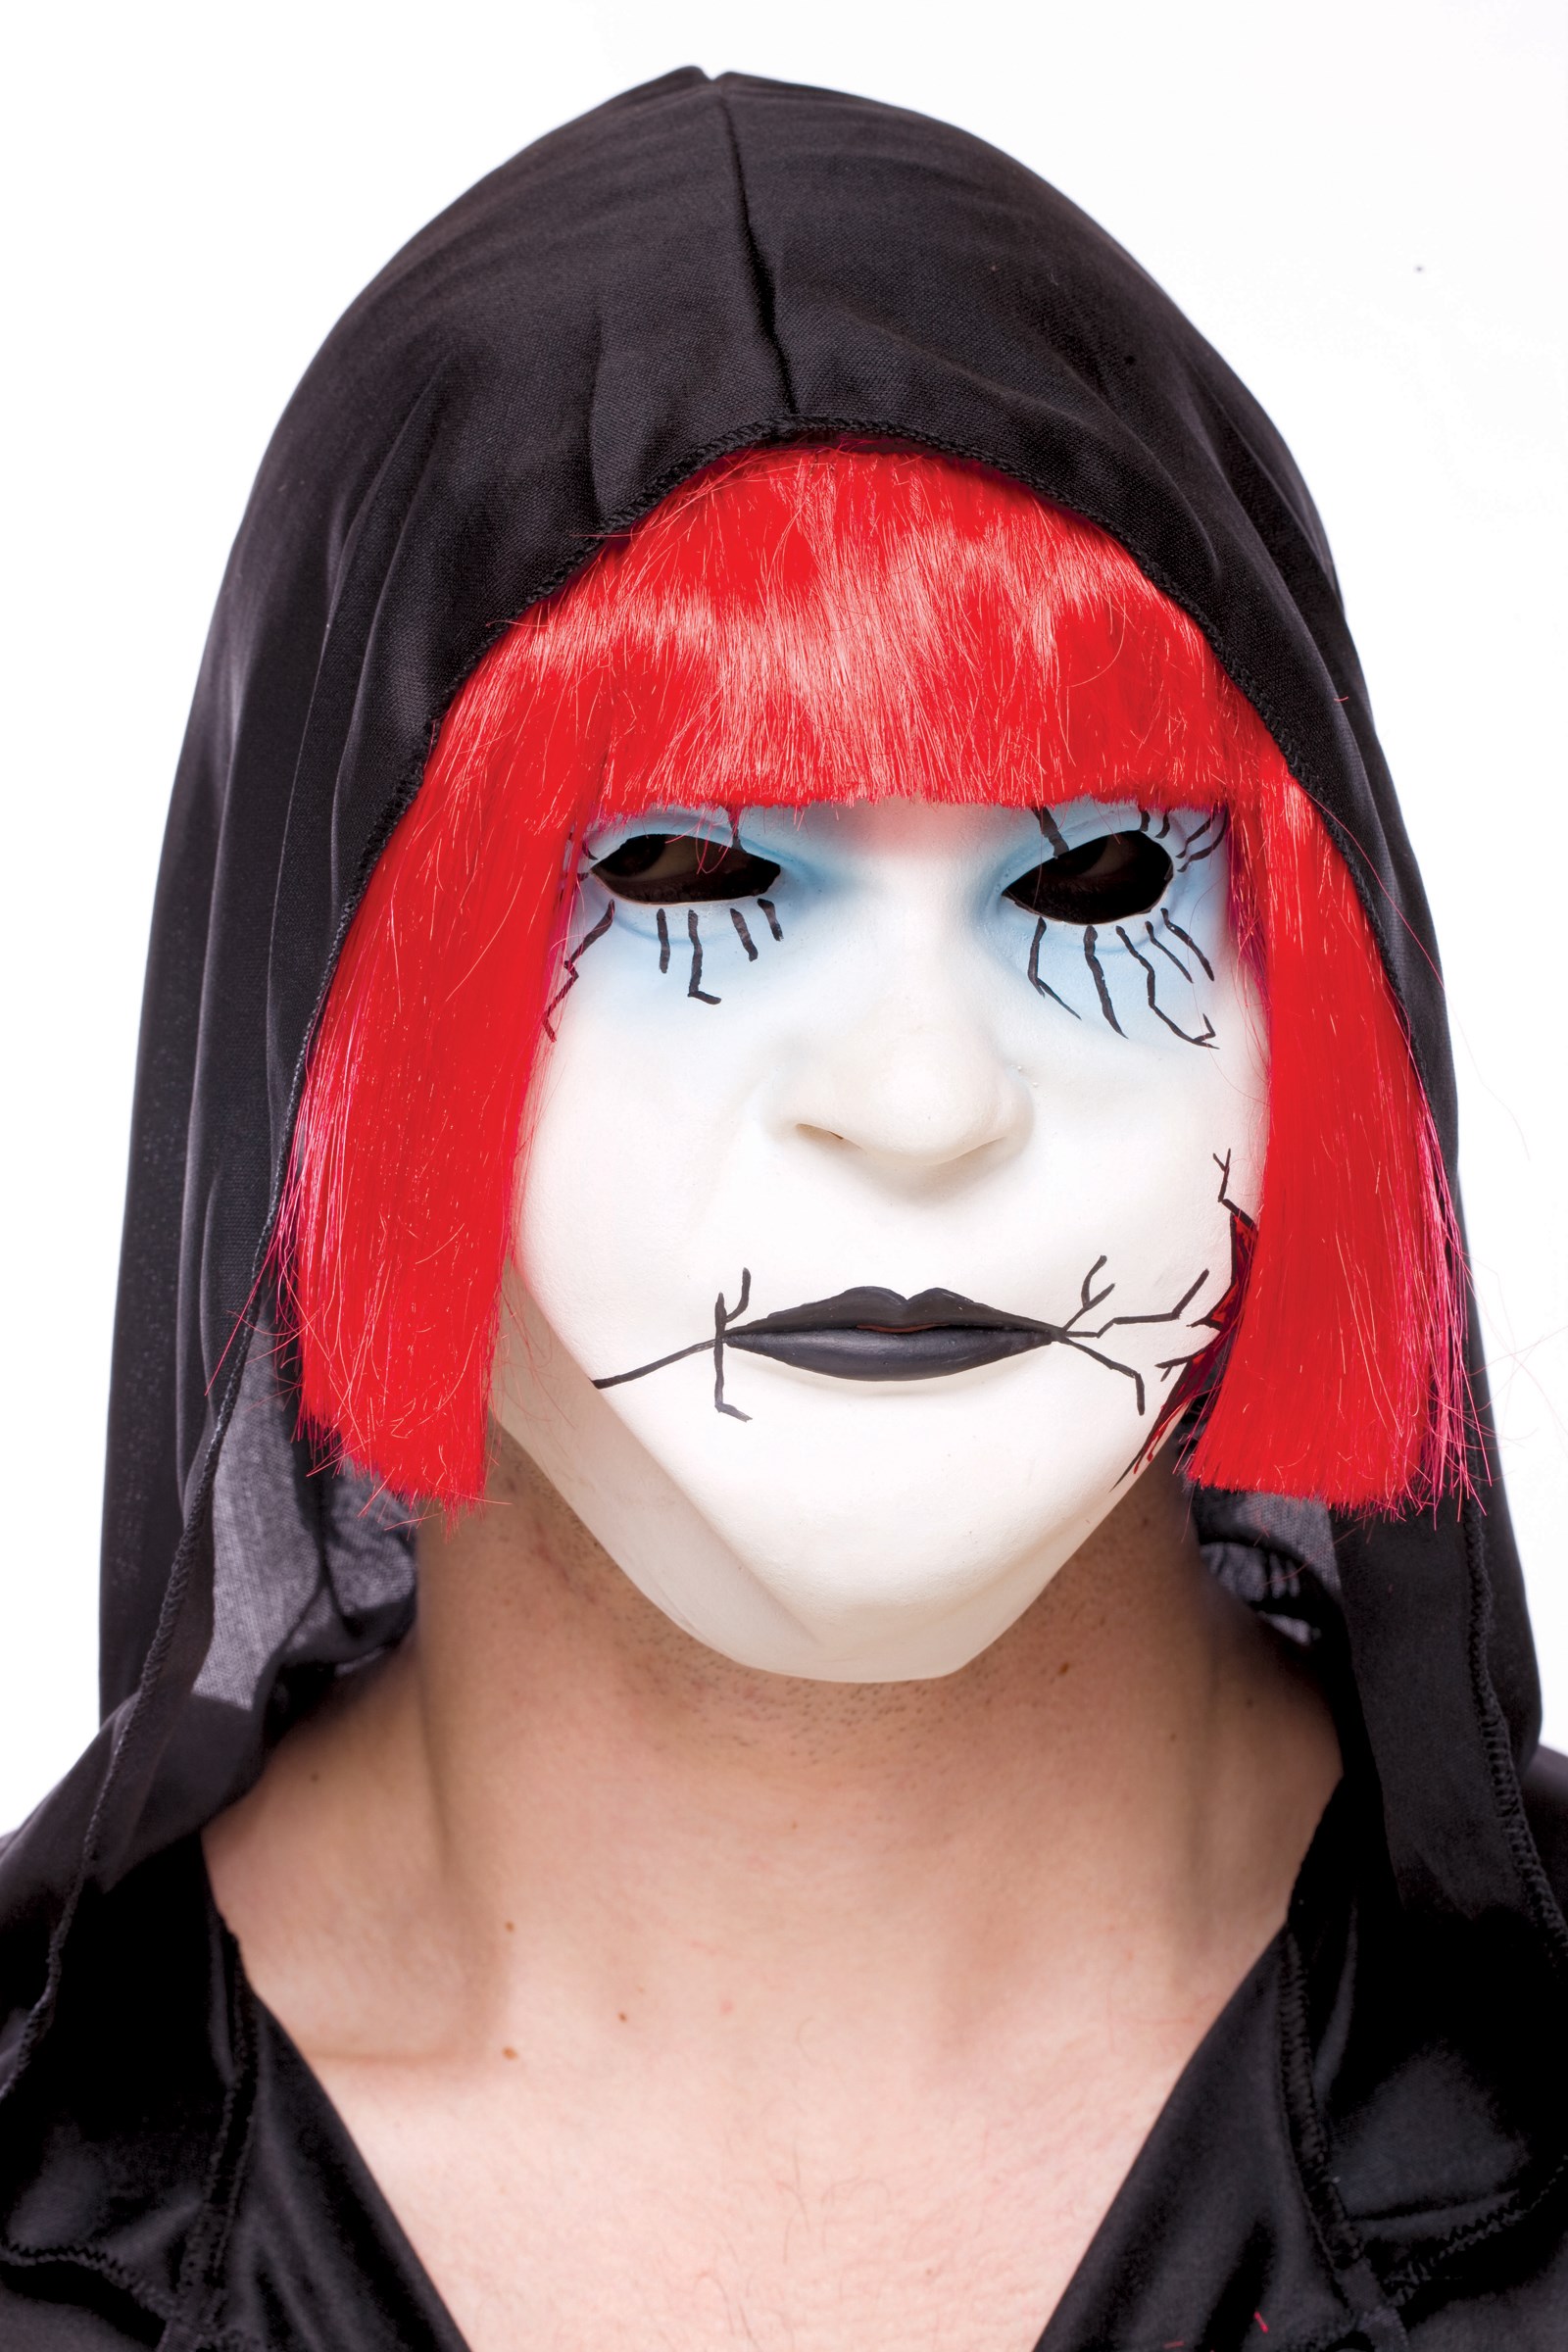 Creepers Crackedy Ann Adult Mask with Hair